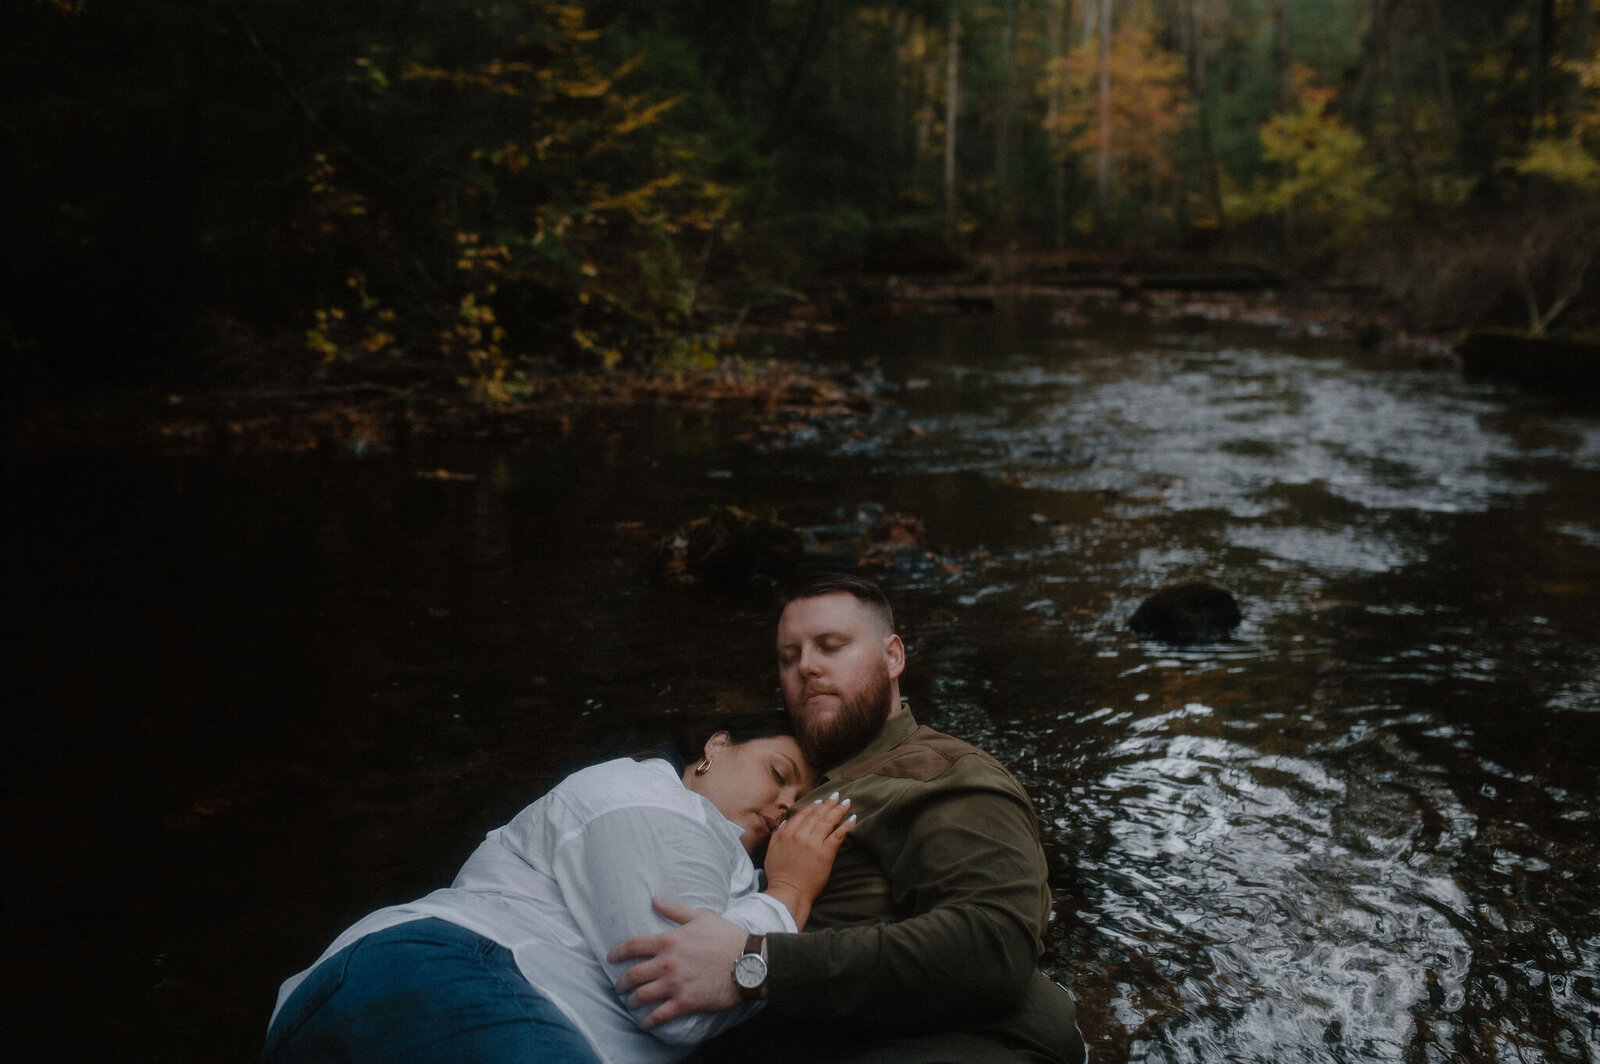 couple in the creek with november colors and romantic woods